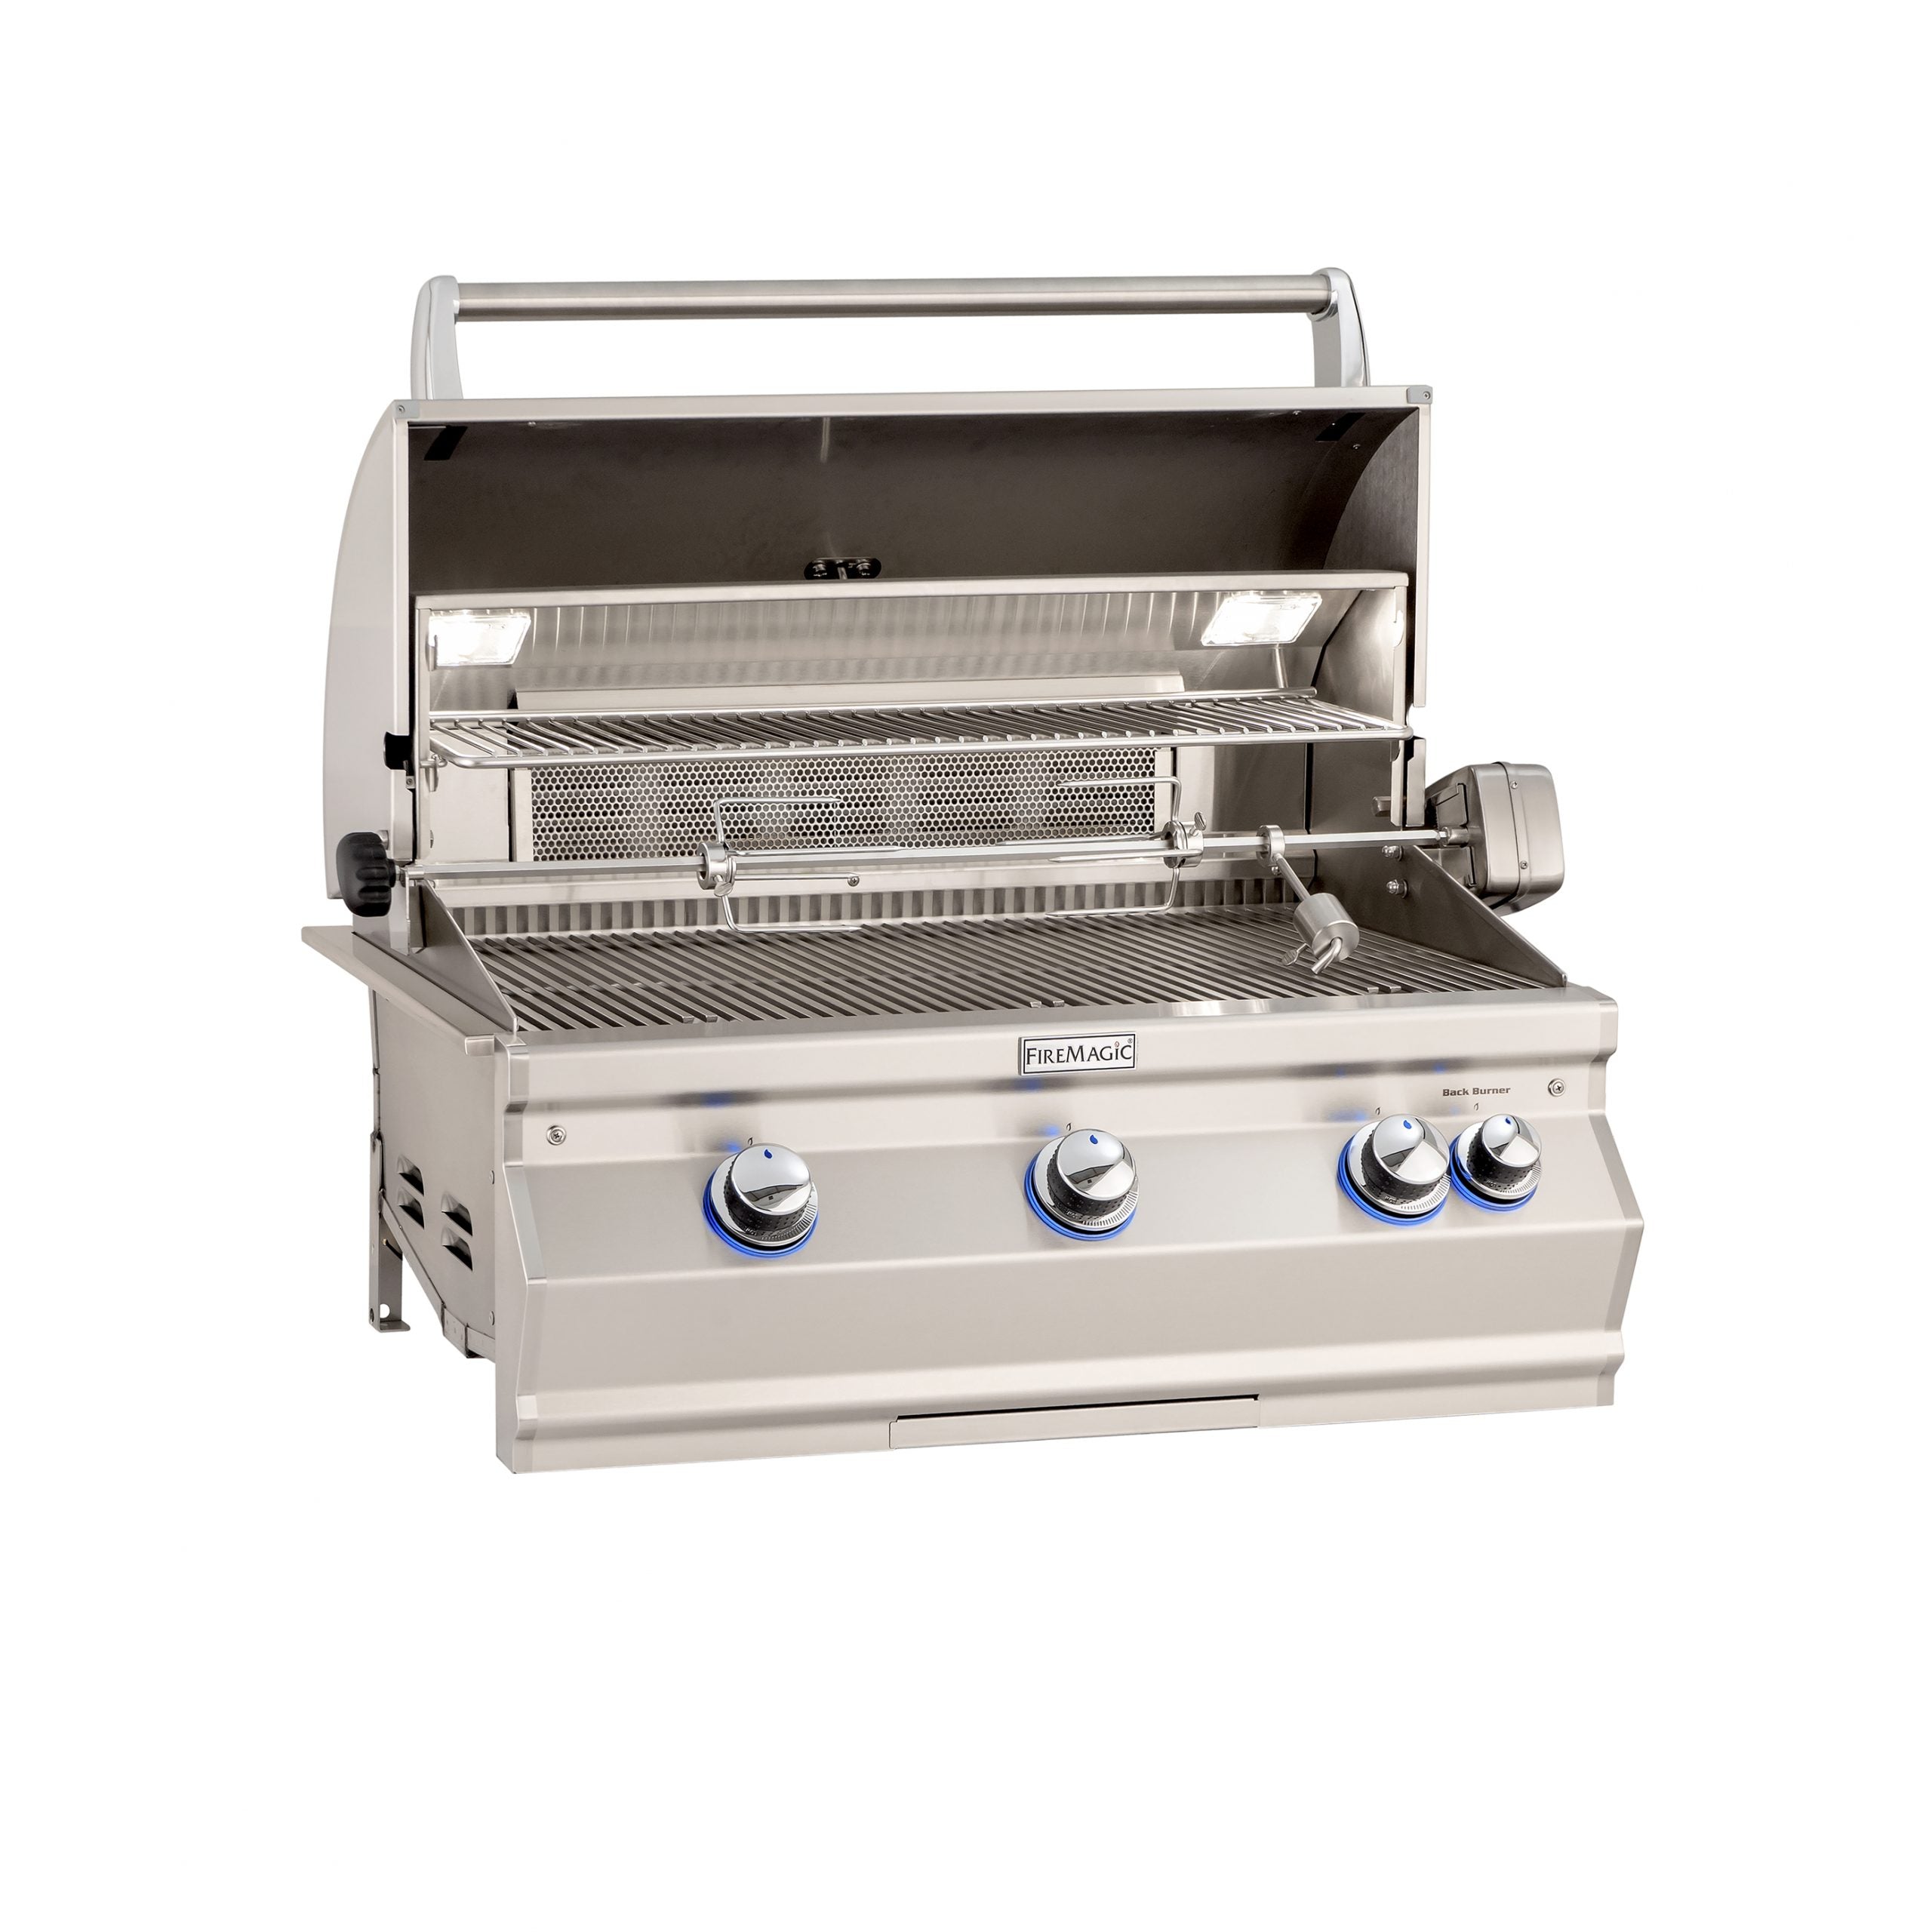 Fire Magic Aurora A540i Built-In Grill - Analog Thermometer With Rotisserie Back Burner